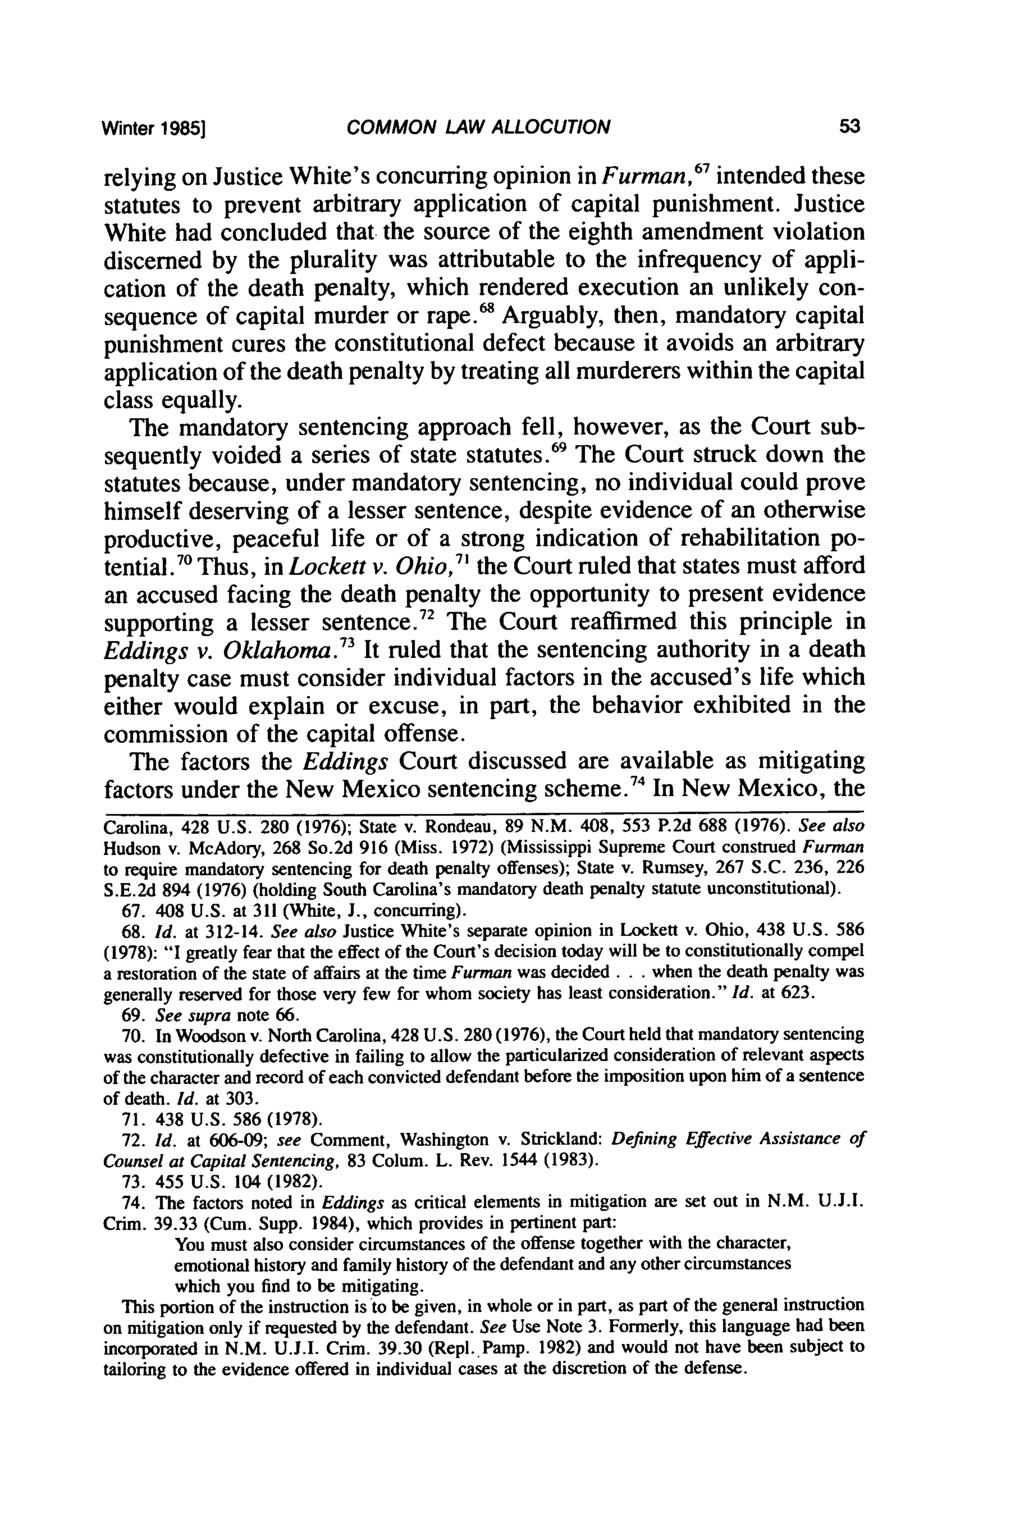 Winter 1985] COMMON LAW ALLOCUTION relying on Justice White's concurring opinion in Furman, 67 intended these statutes to prevent arbitrary application of capital punishment.